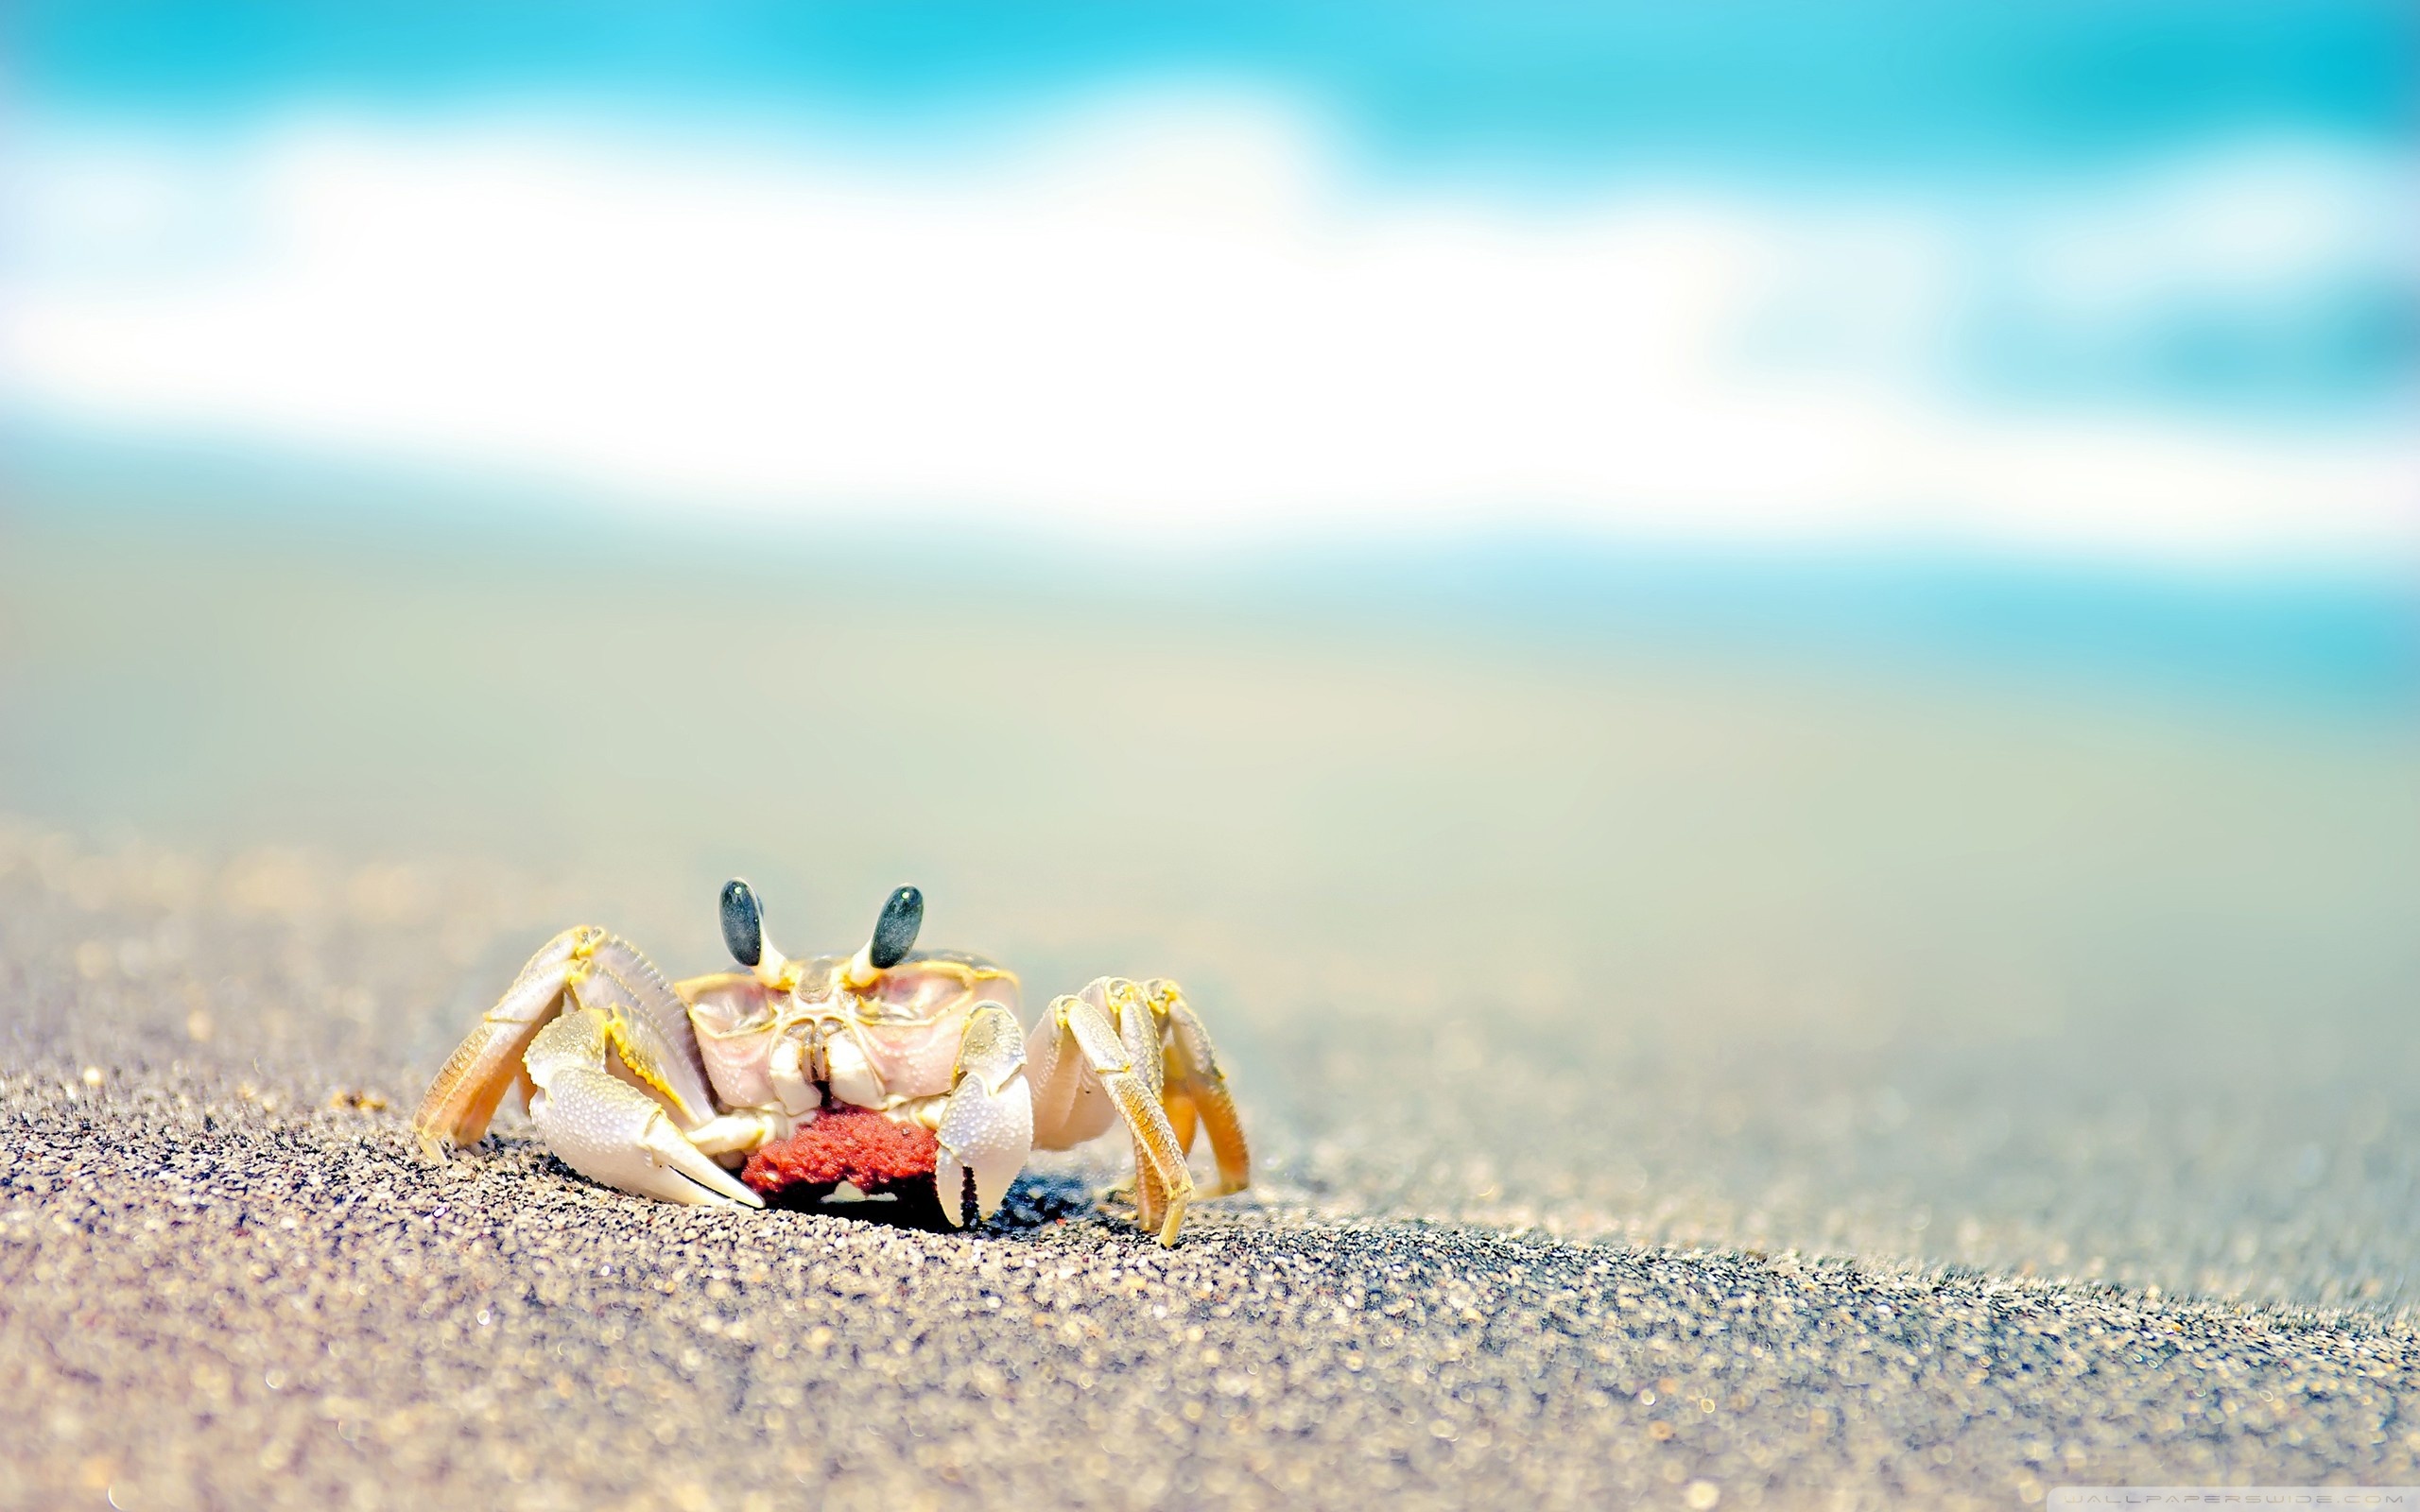 Small crab on a beach wallpapers and images - wallpapers, pictures ...